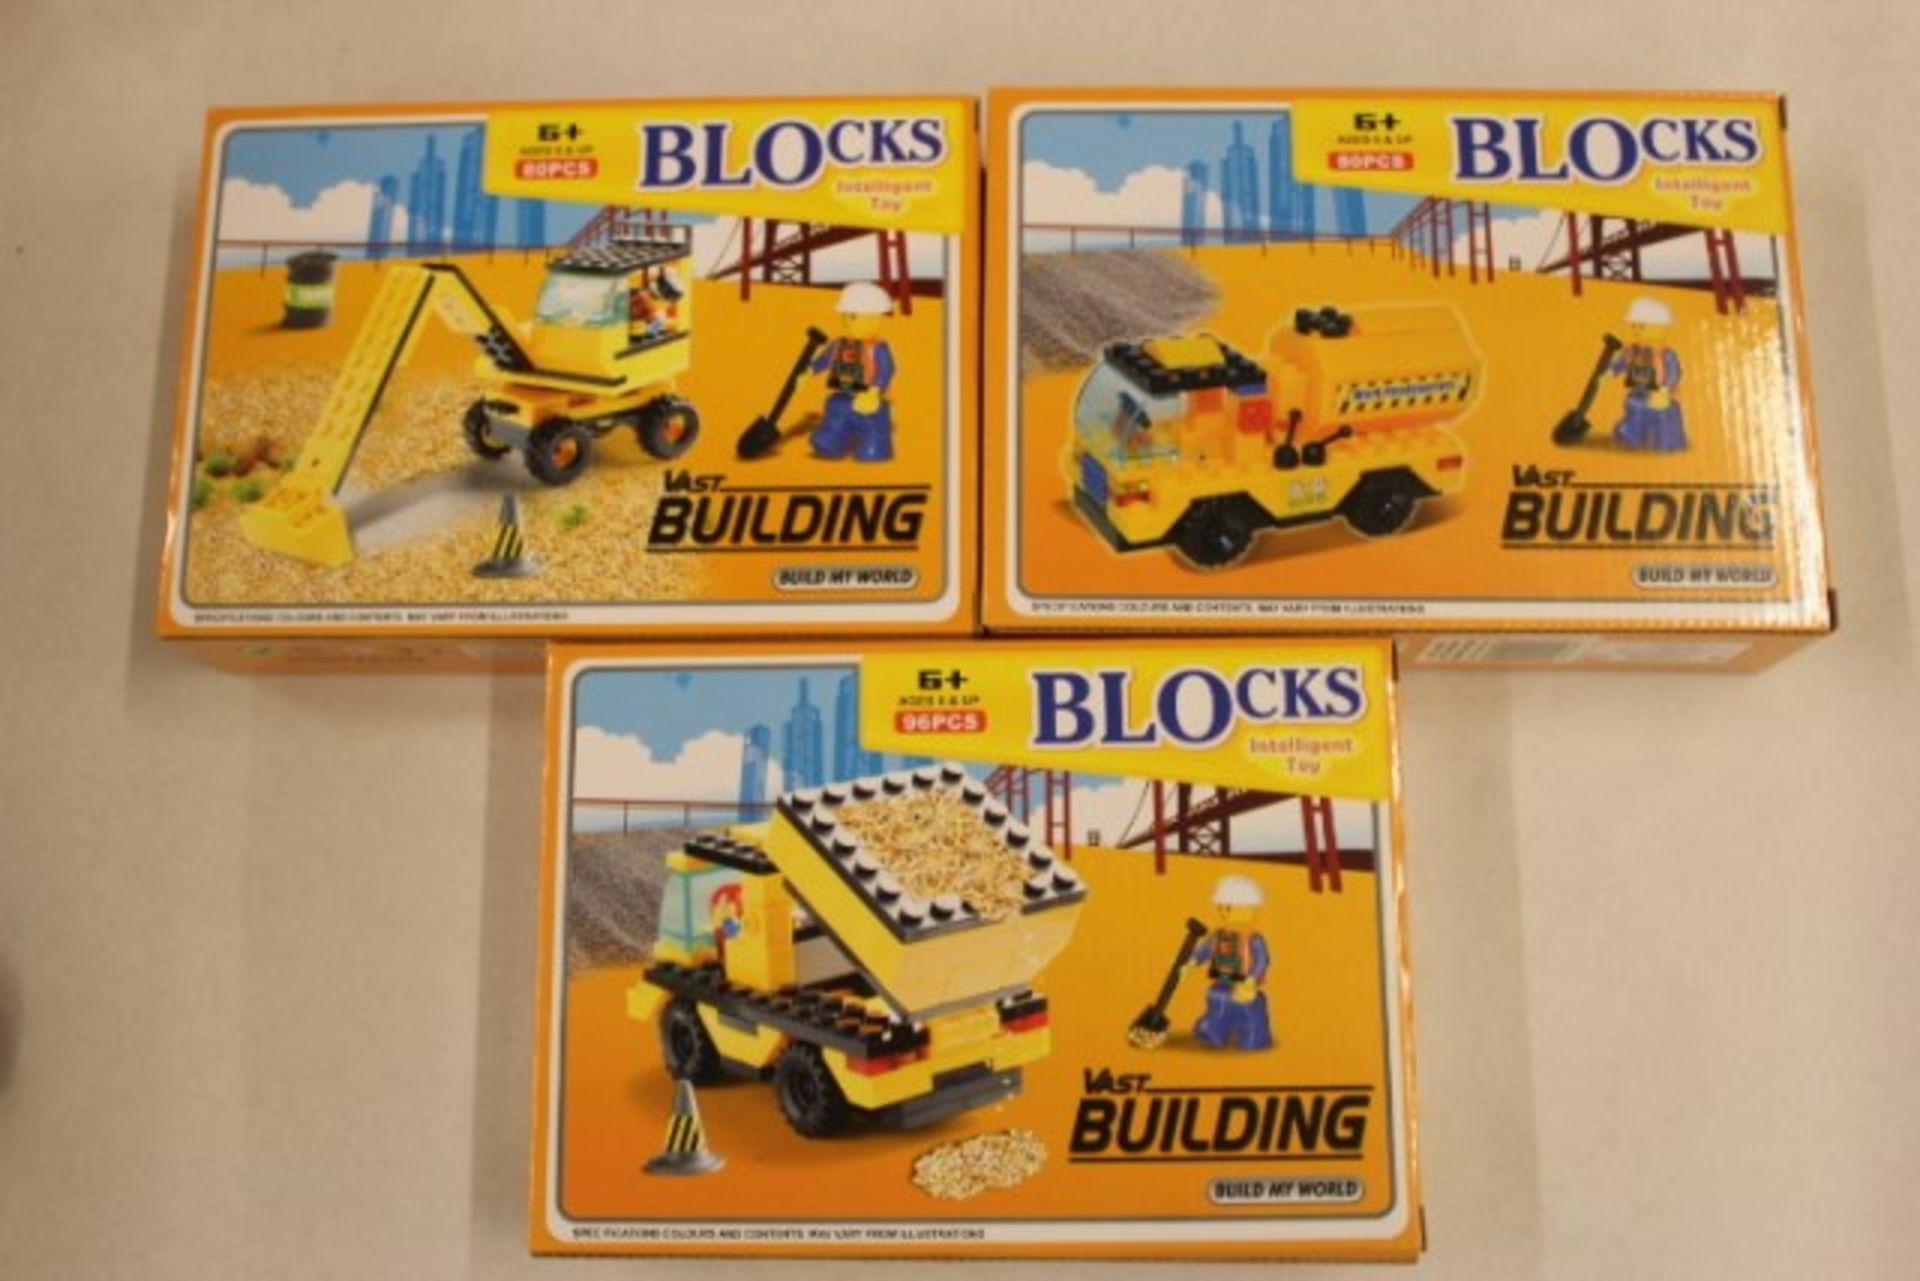 V *TRADE QTY* Brand New 80/96pc Lego Type Construction Kit Intelligent Toy X 8 YOUR BID PRICE TO